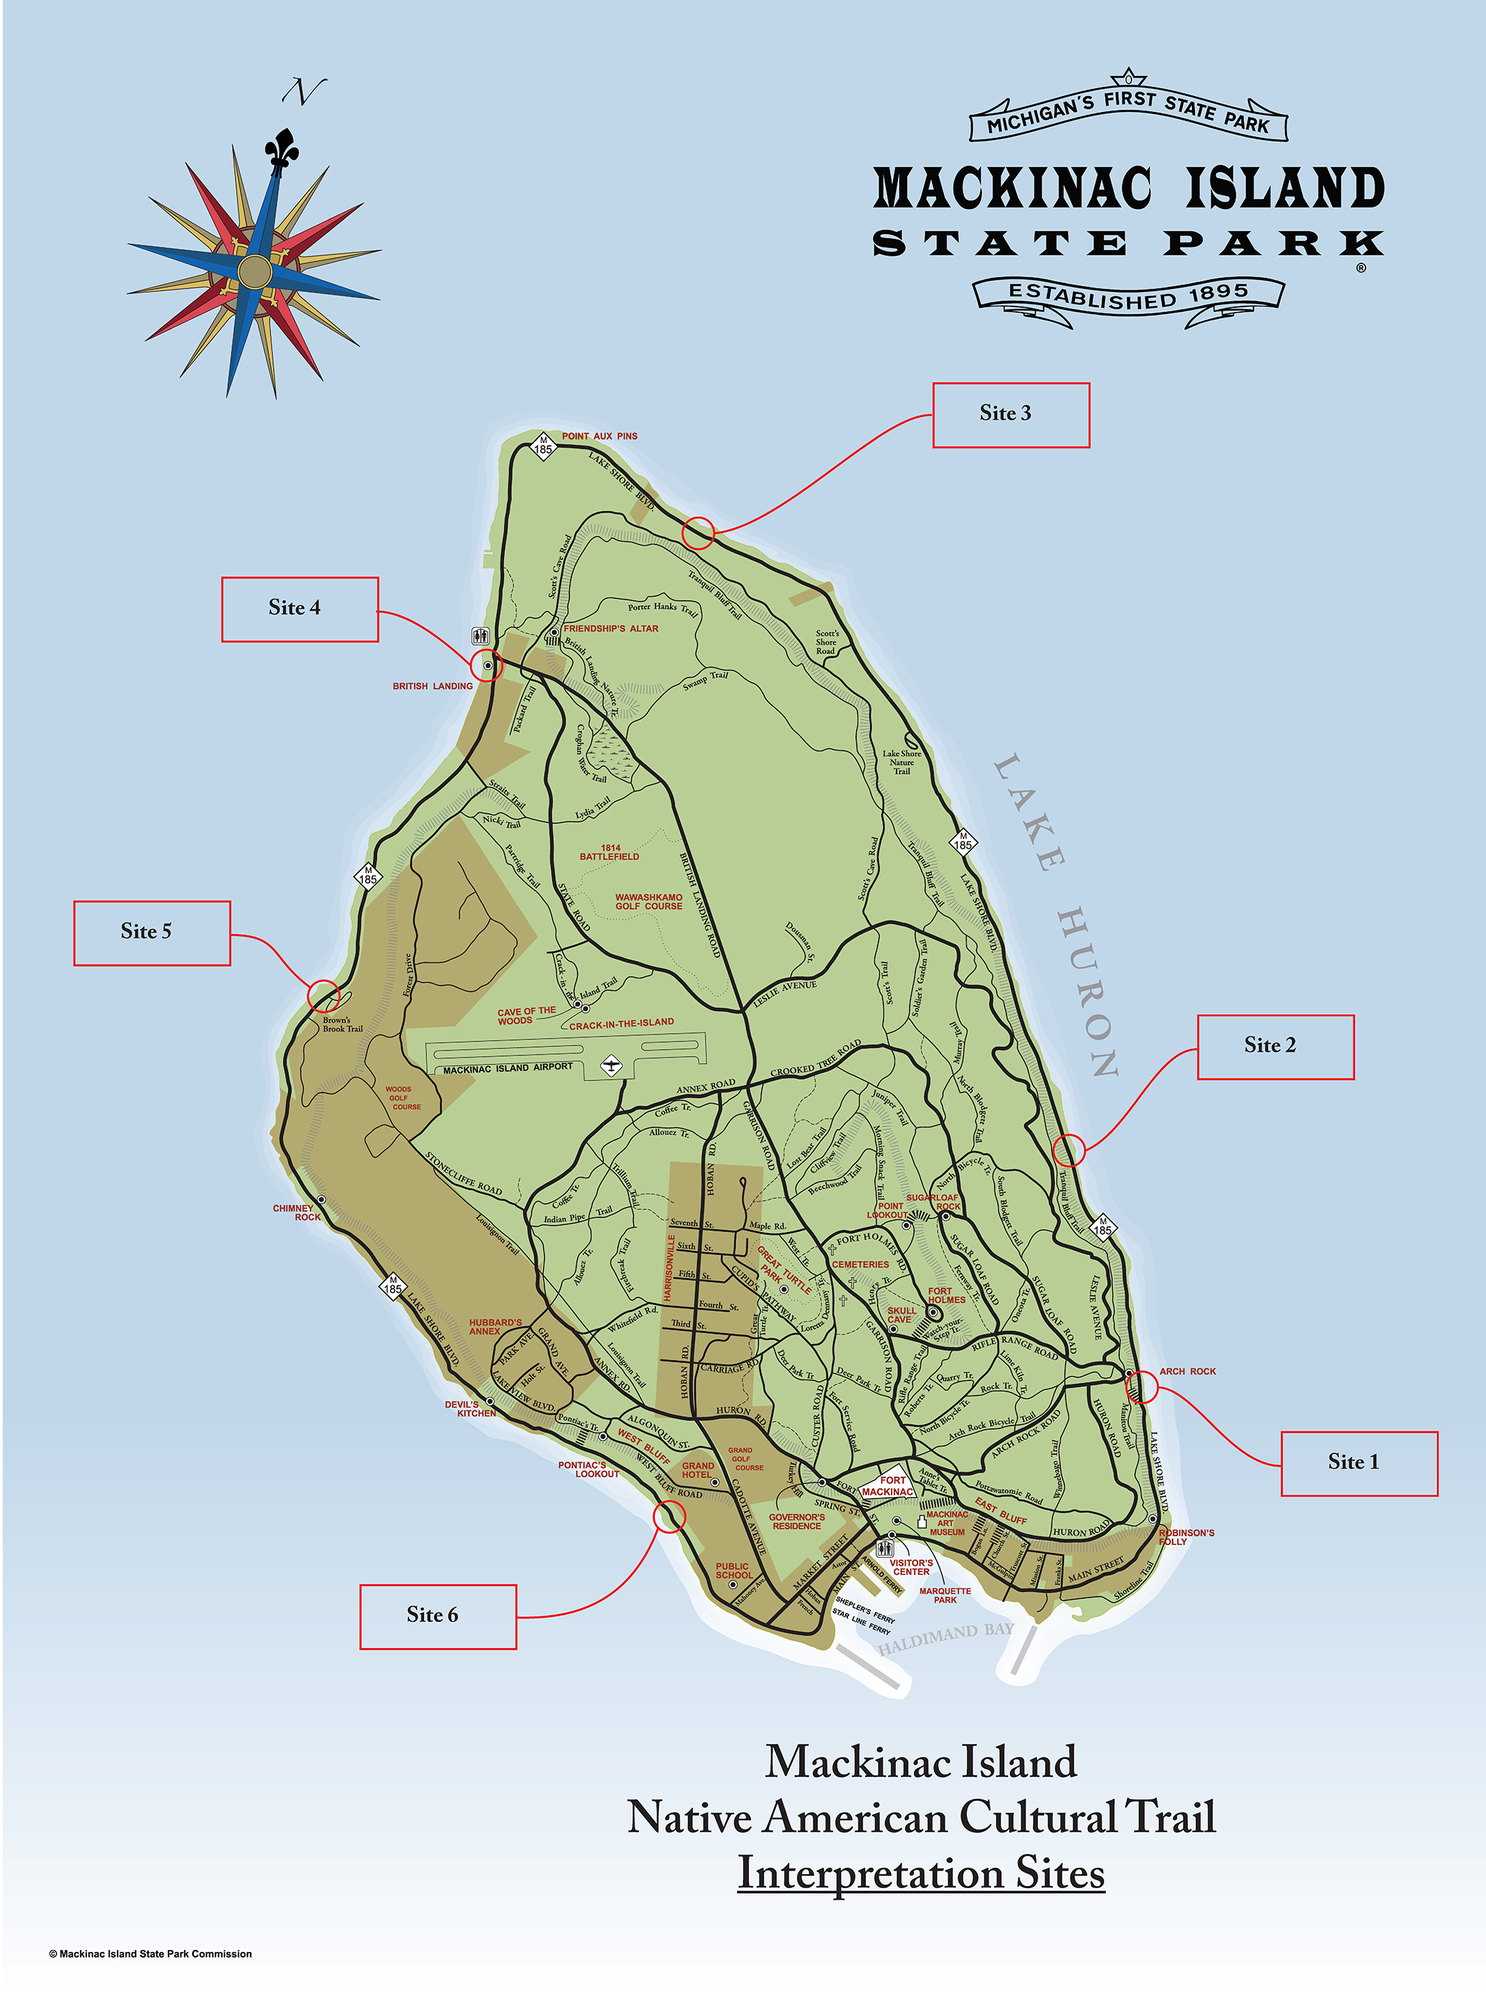 A map shows the locations of six interpretive panels on Mackinac Island, which detail various elements of Native American history.